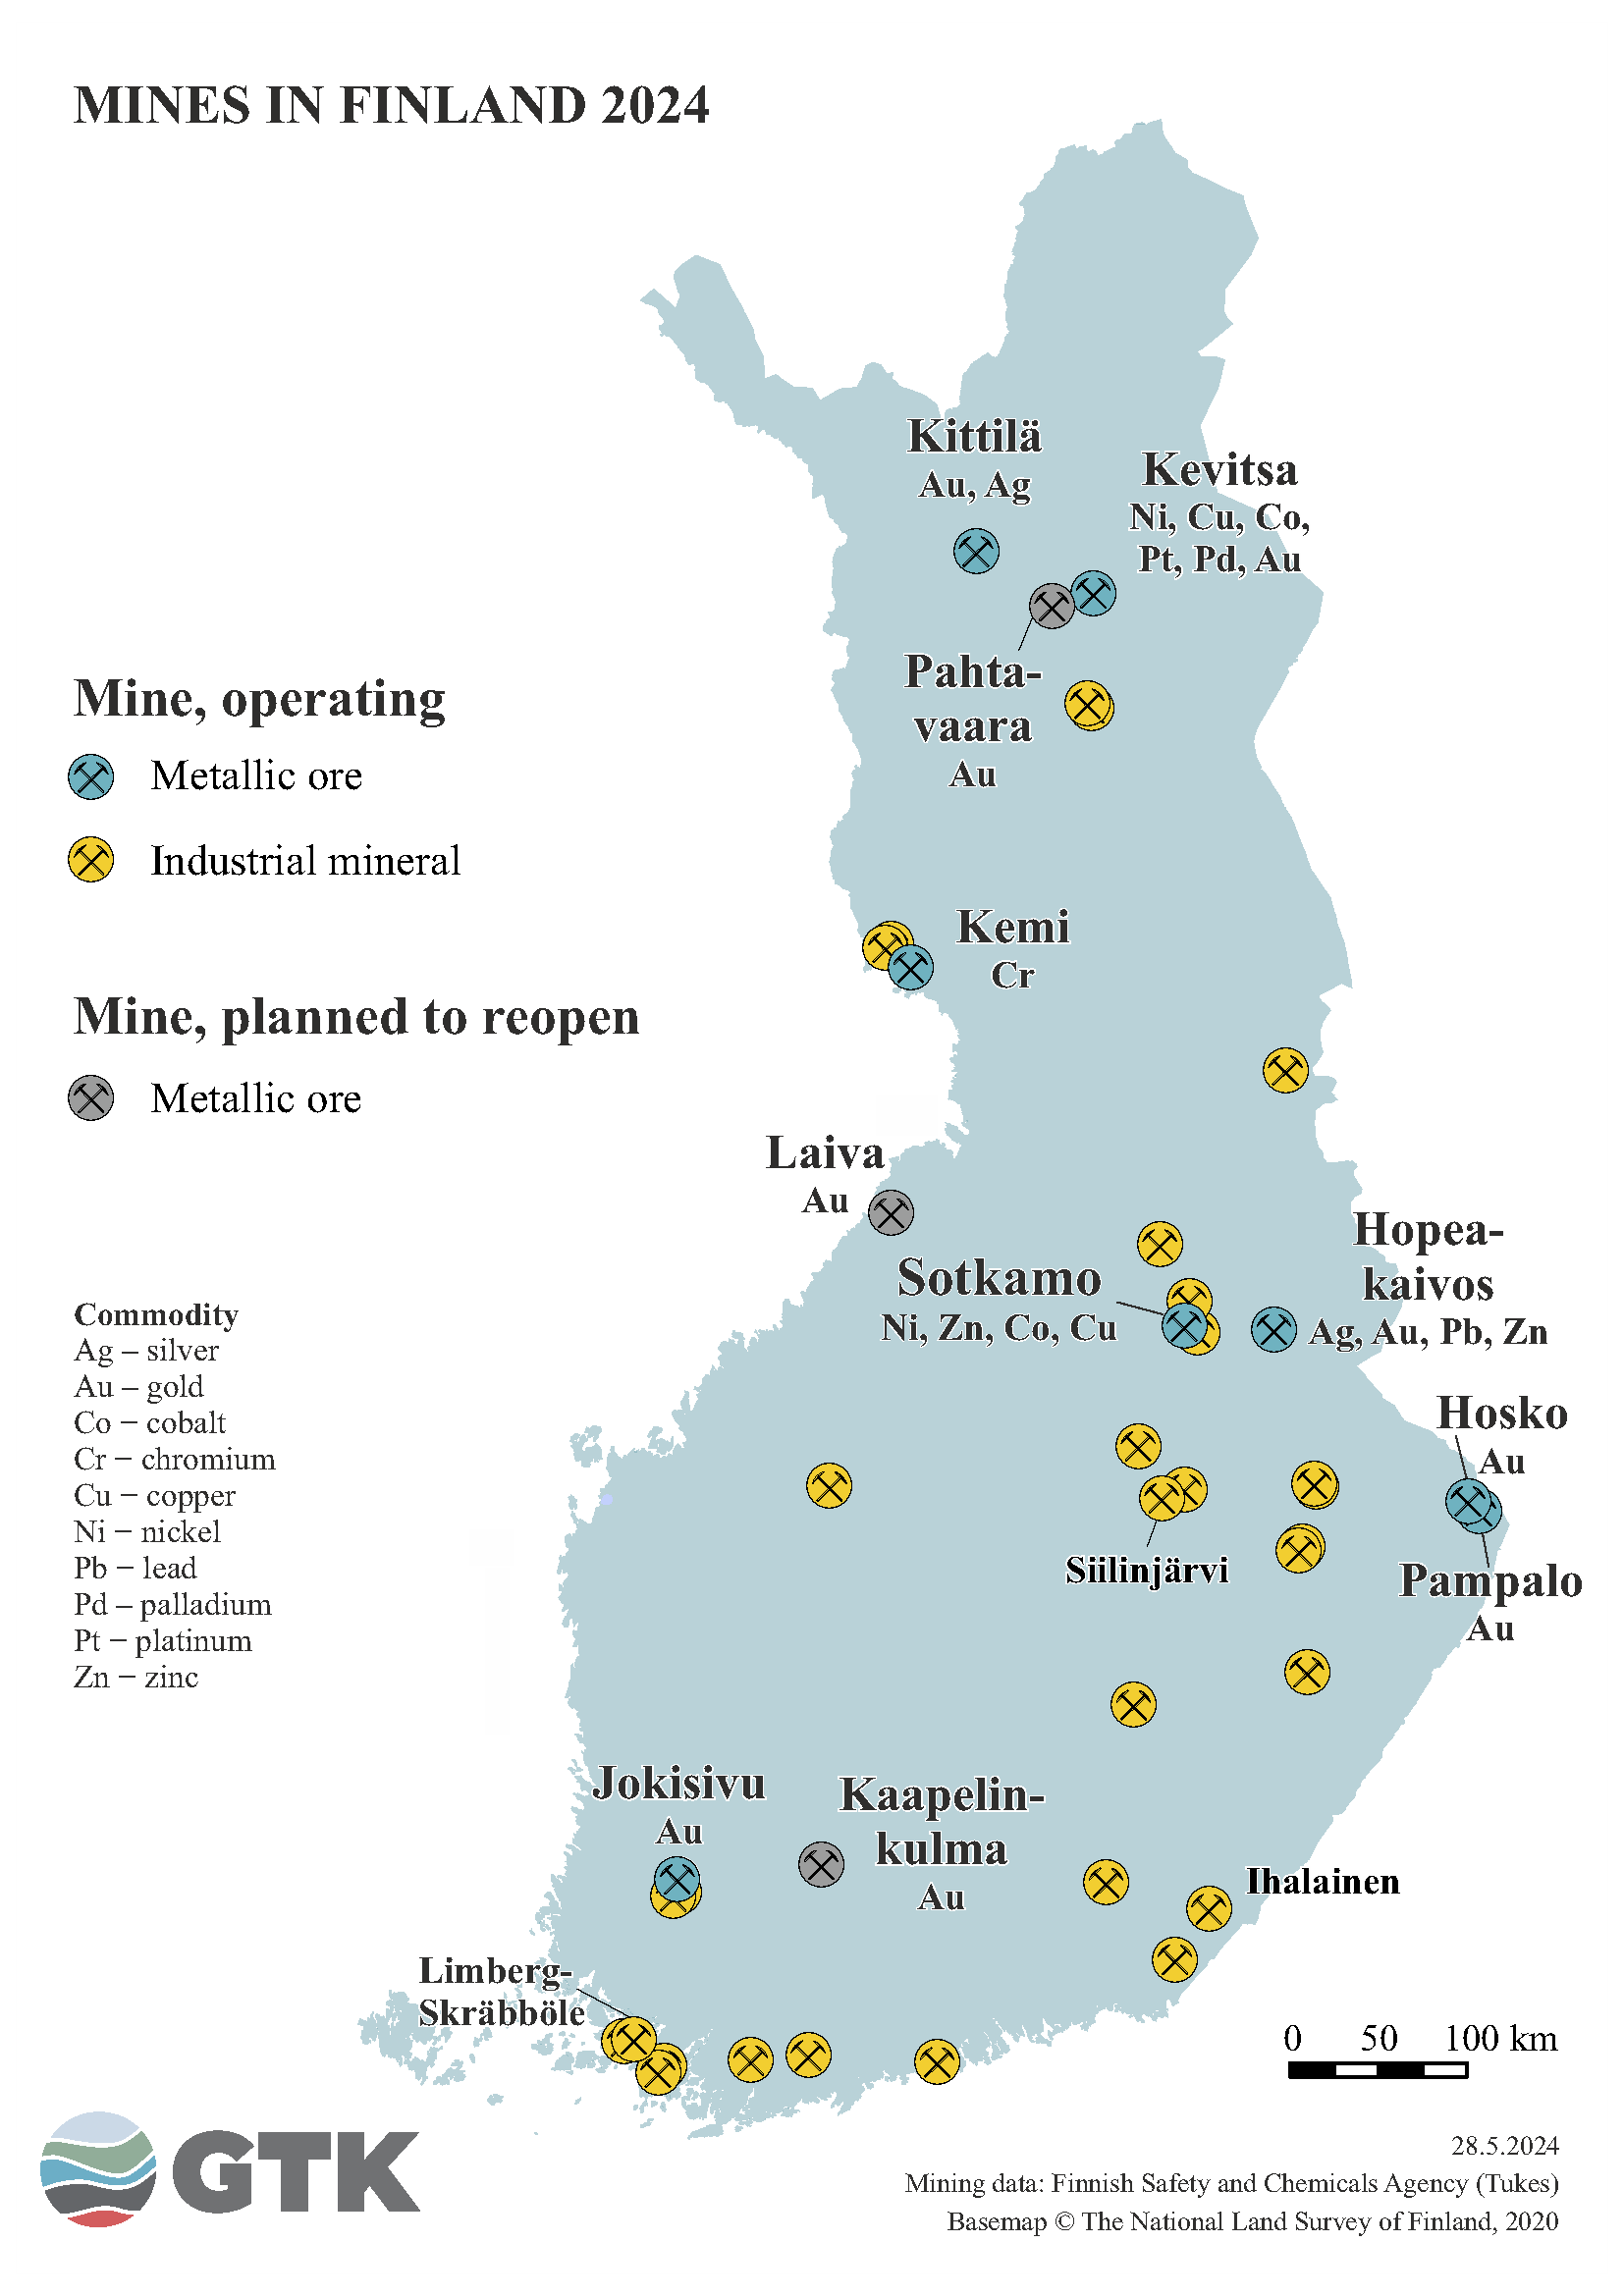 Mines on the map of Finland